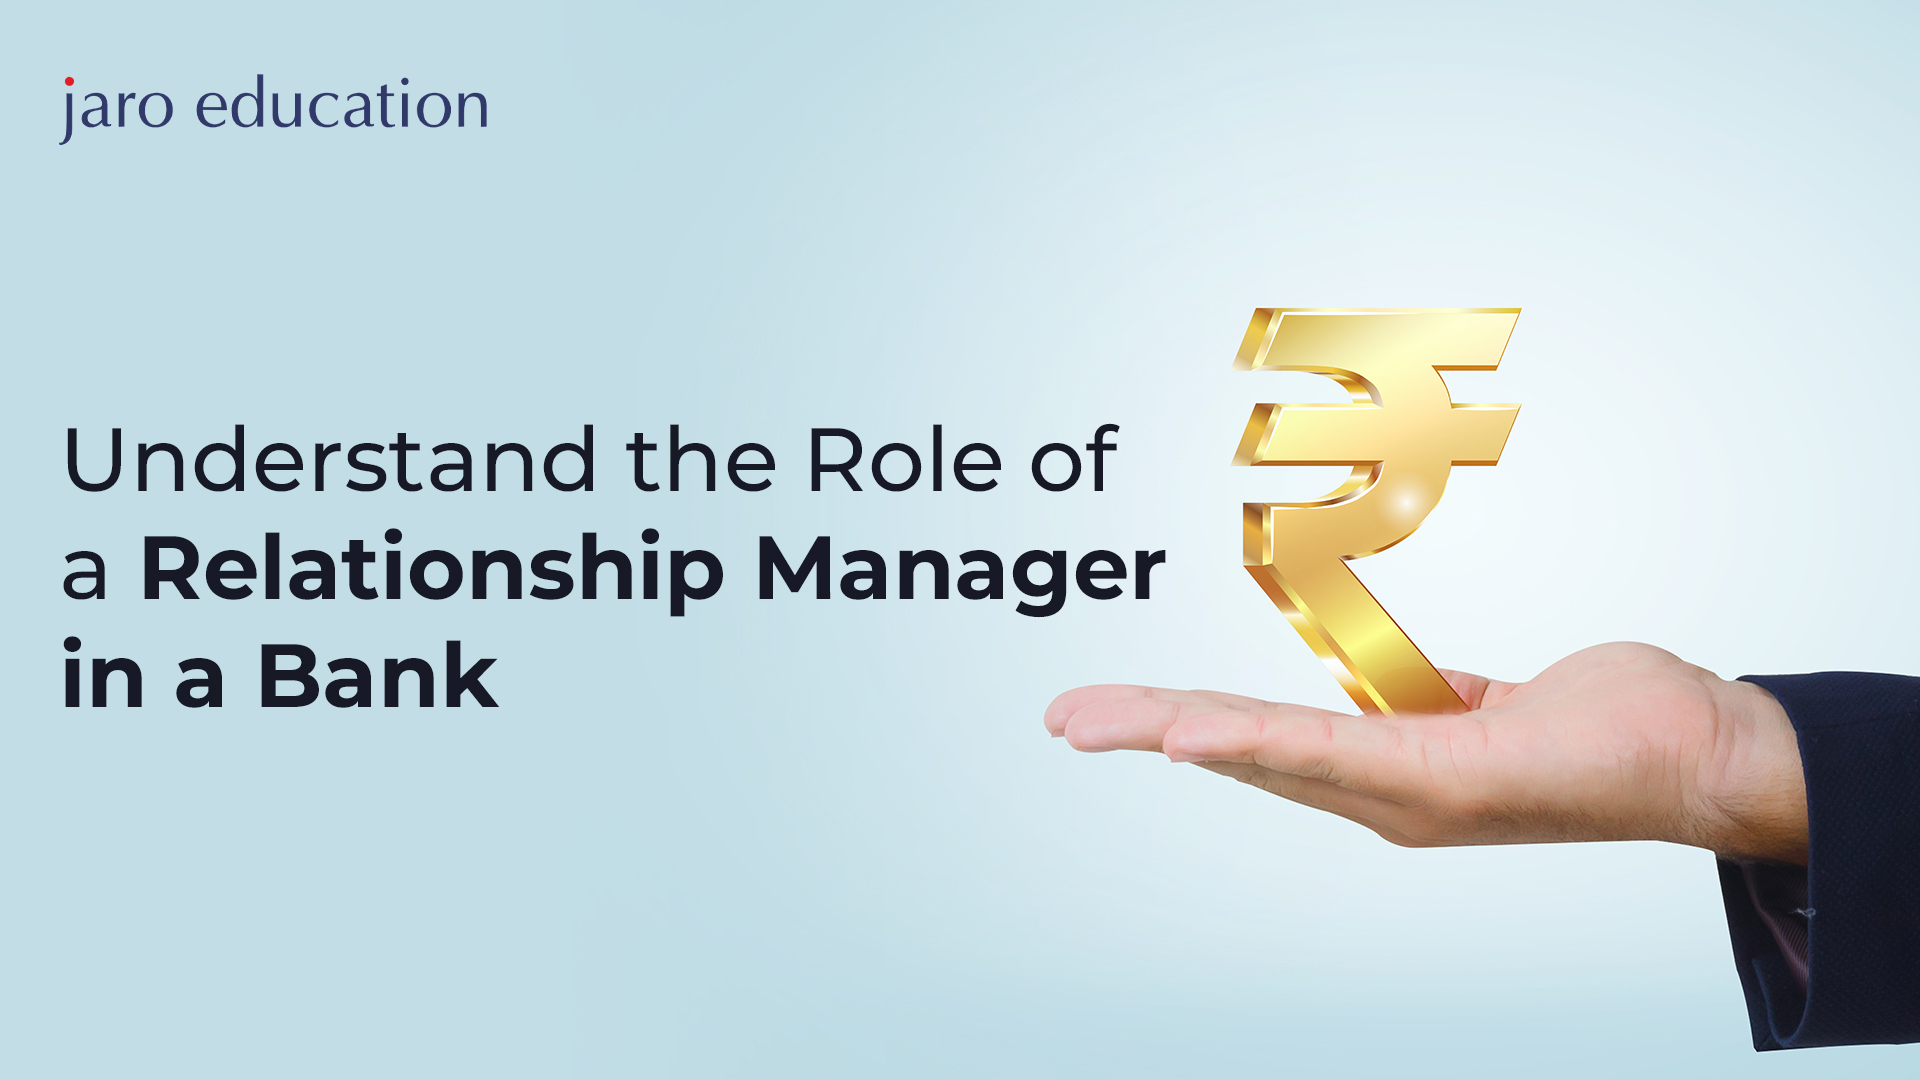 Understand the Role of a Relationship Manager in a Bank